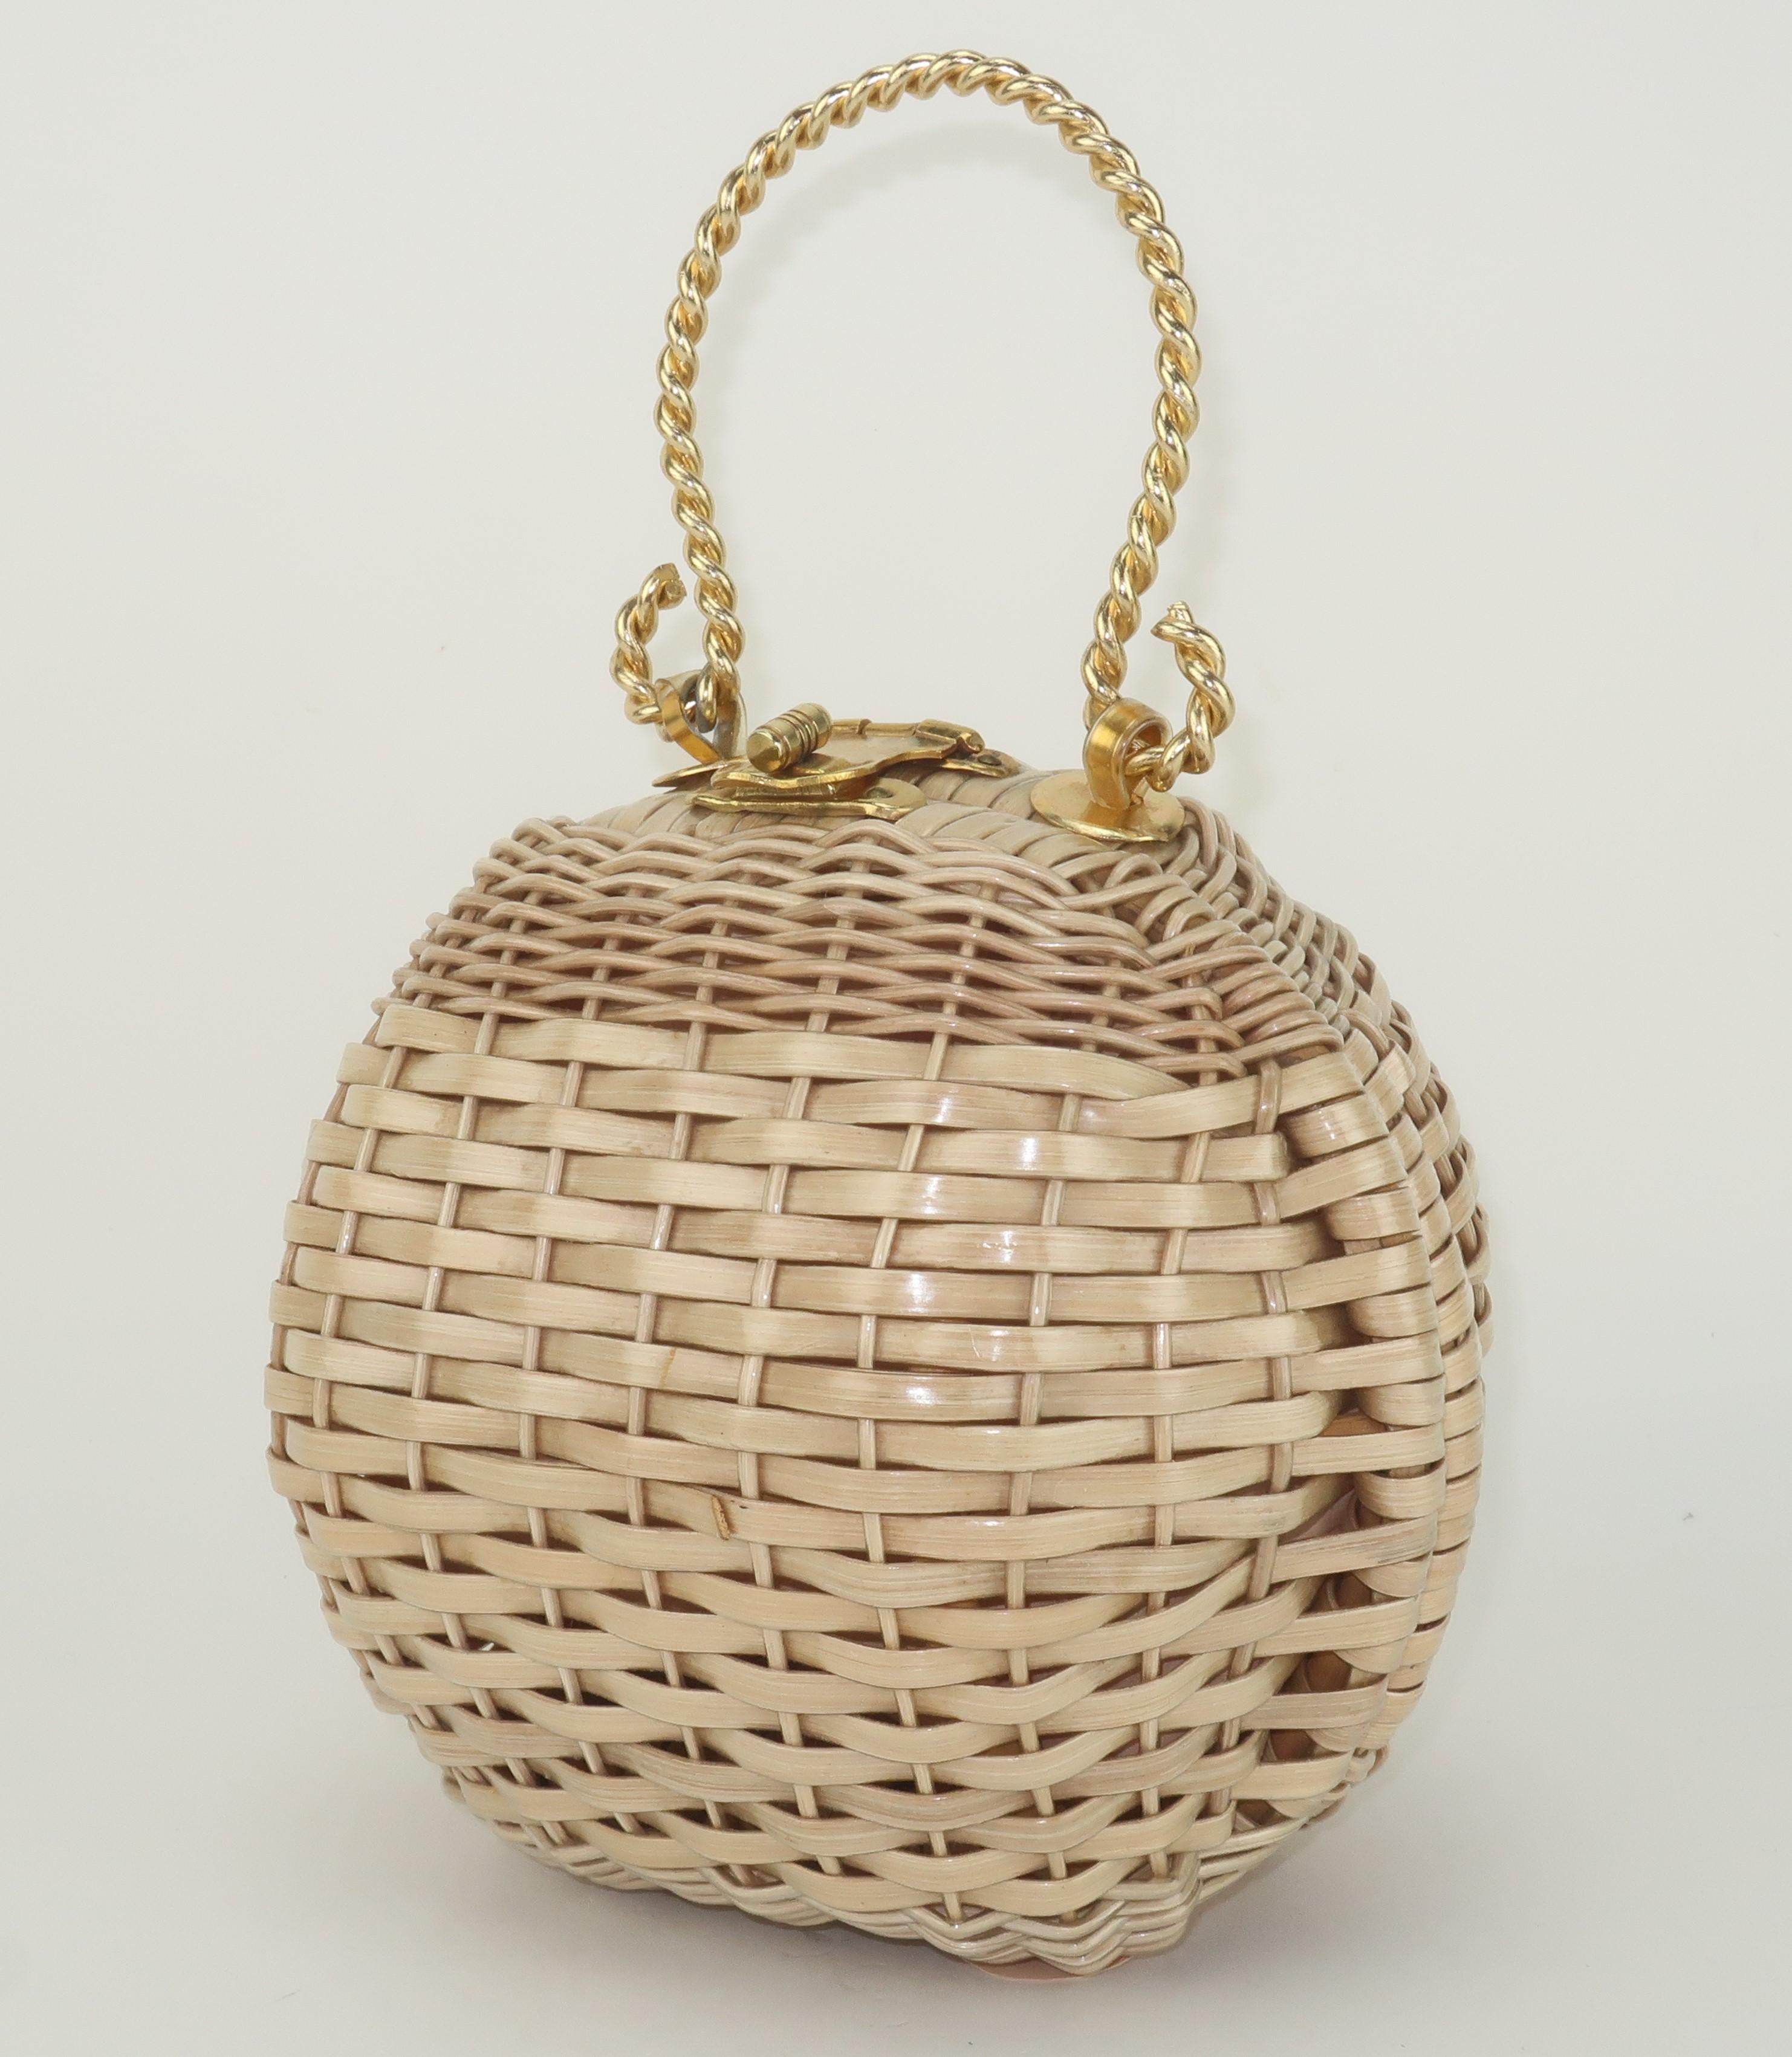 Adorable 1960's coated wicker handbag with a spherical silhouette and twisted gold metal handle.  The kisslock closure opens to reveal a vinyl lined interior.  The base is outfitted with plastic tab feet and vinyl hinges.  Perfect vintage accessory